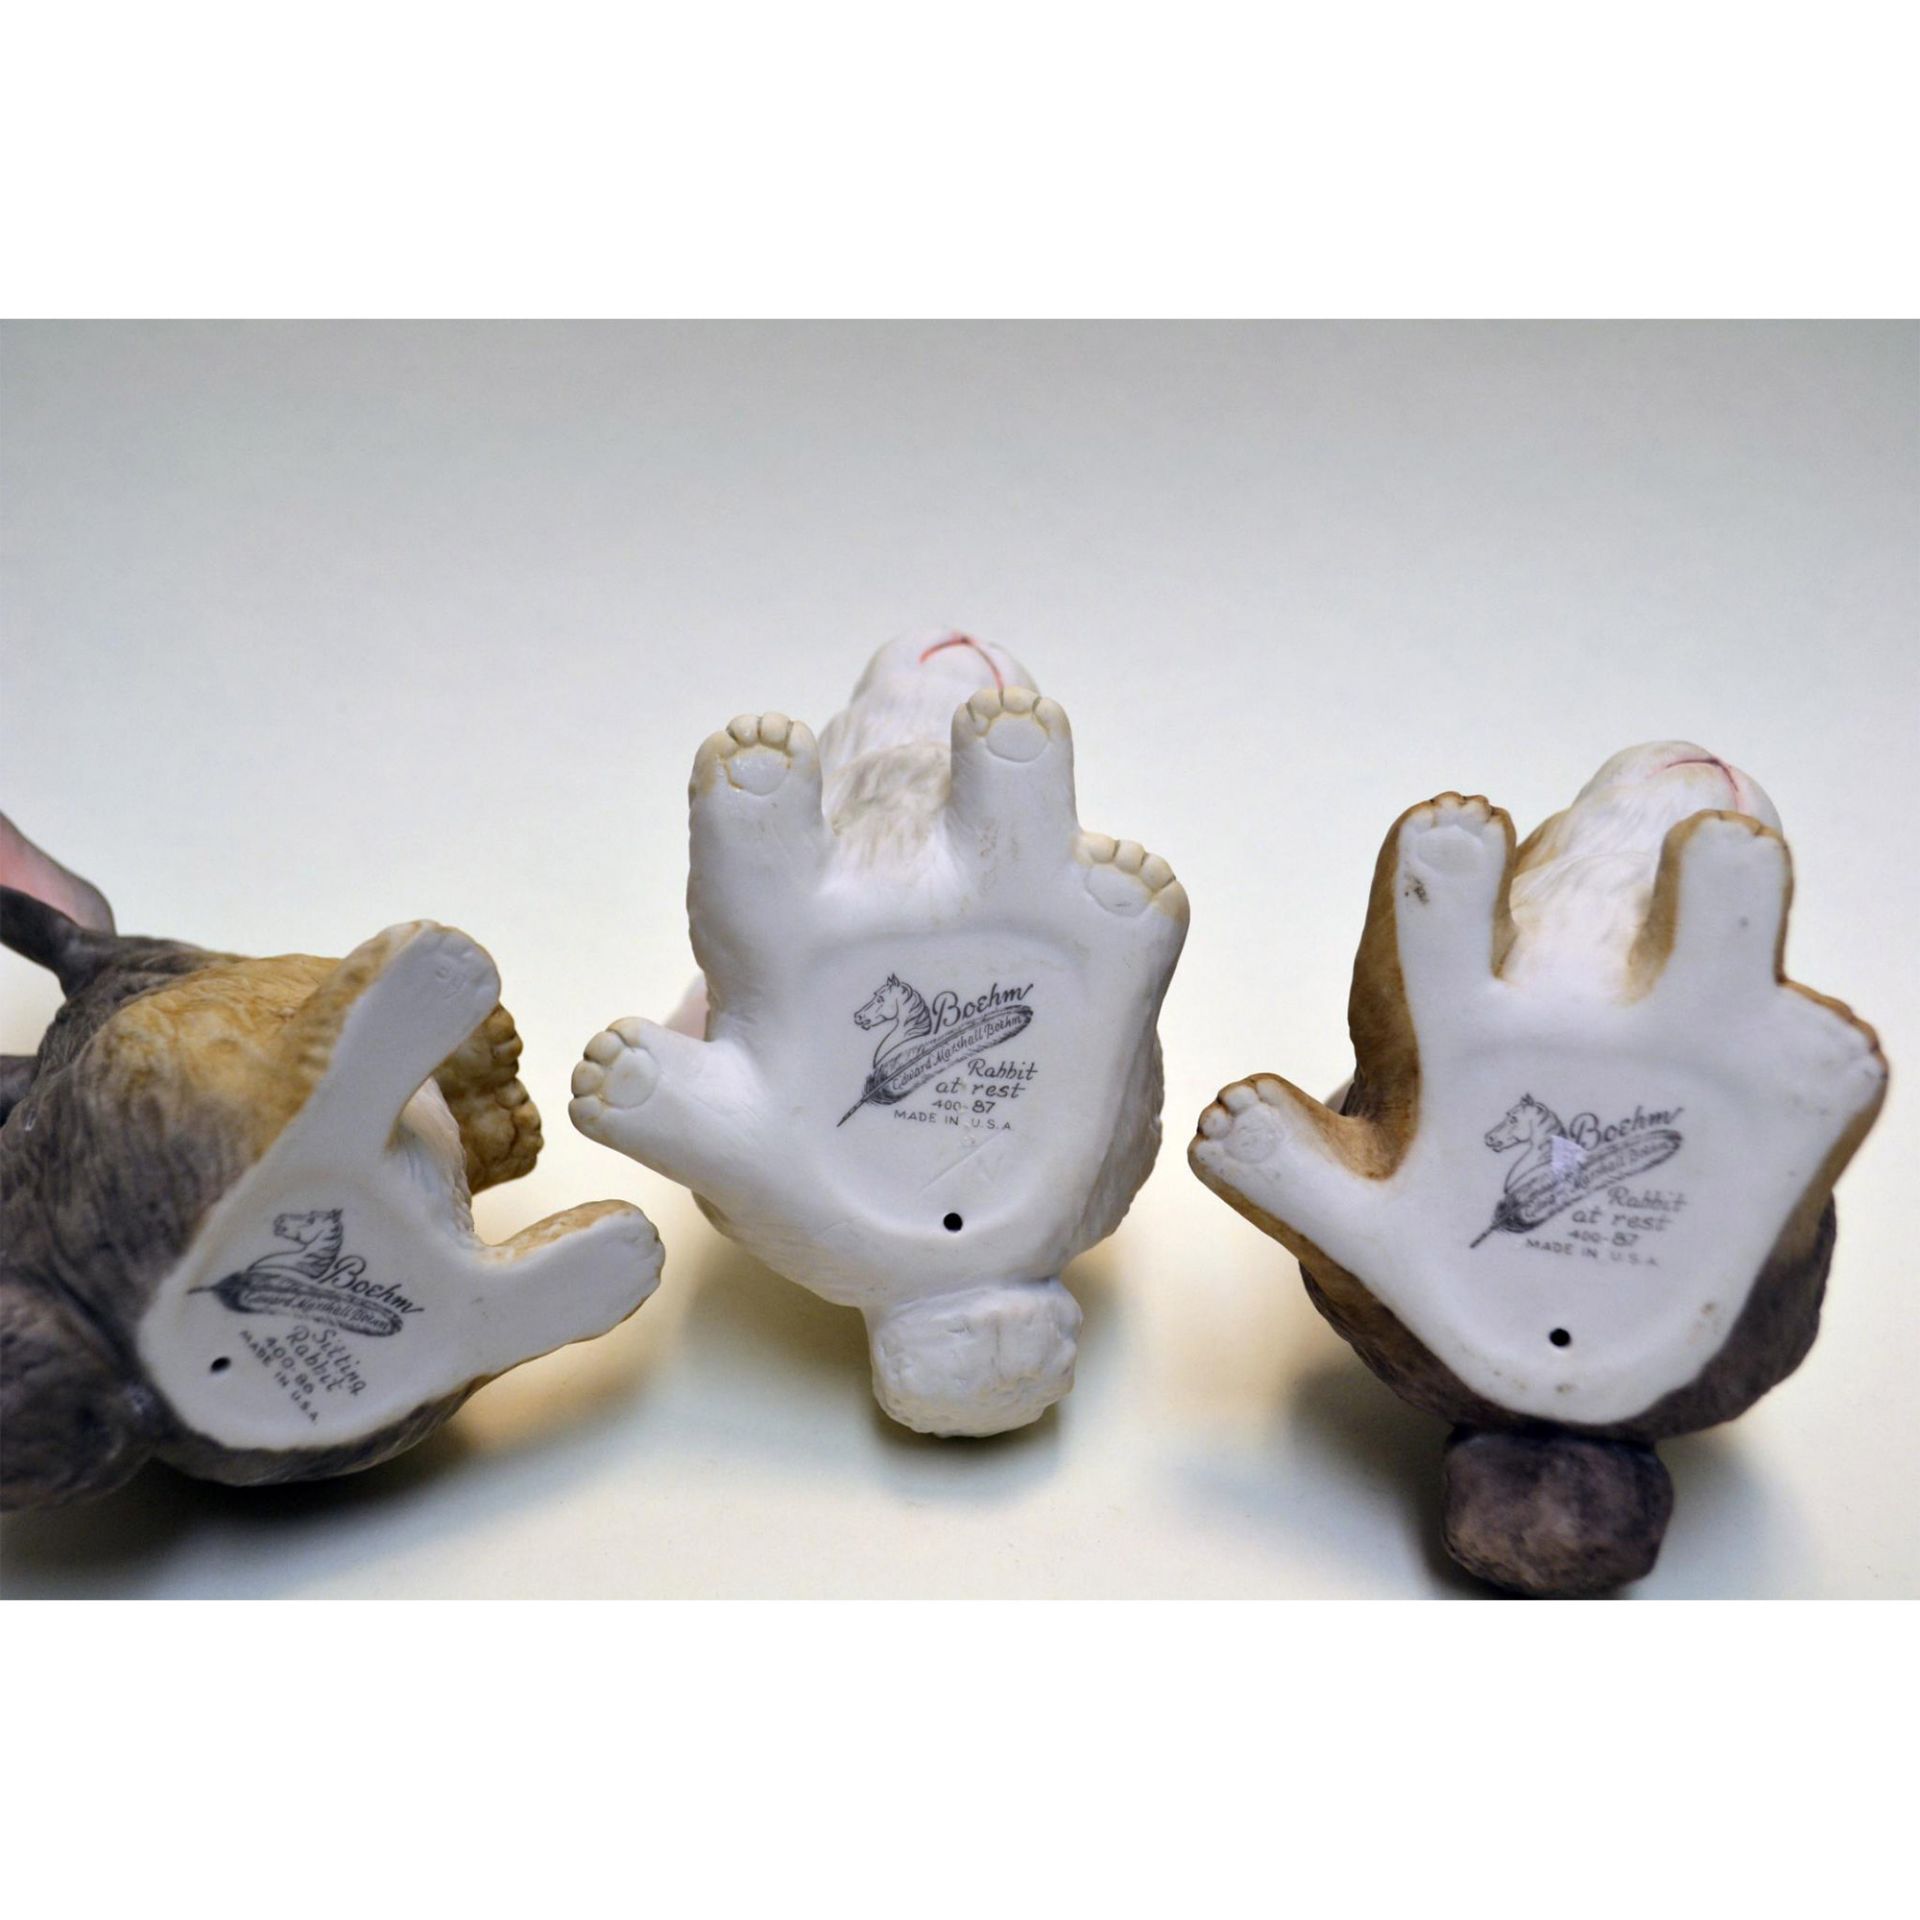 Boehm Porcelain Rabbits, Sitting And At Rest, White & Wild Figurines, 3 Pcs - Image 5 of 6